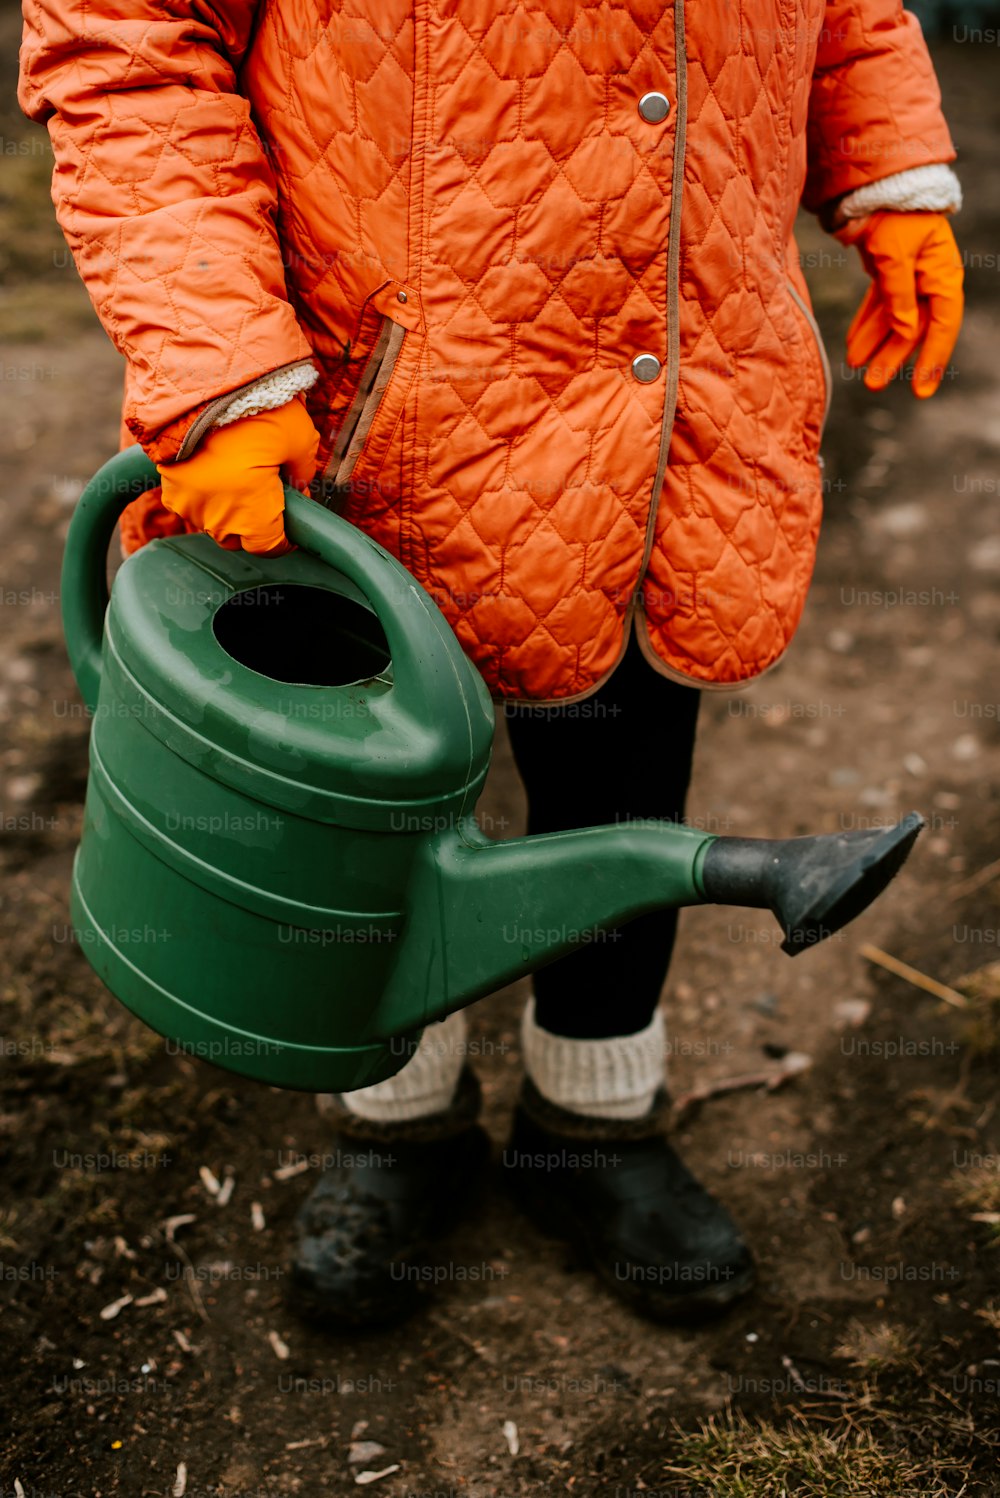 a person in an orange jacket holding a green watering can